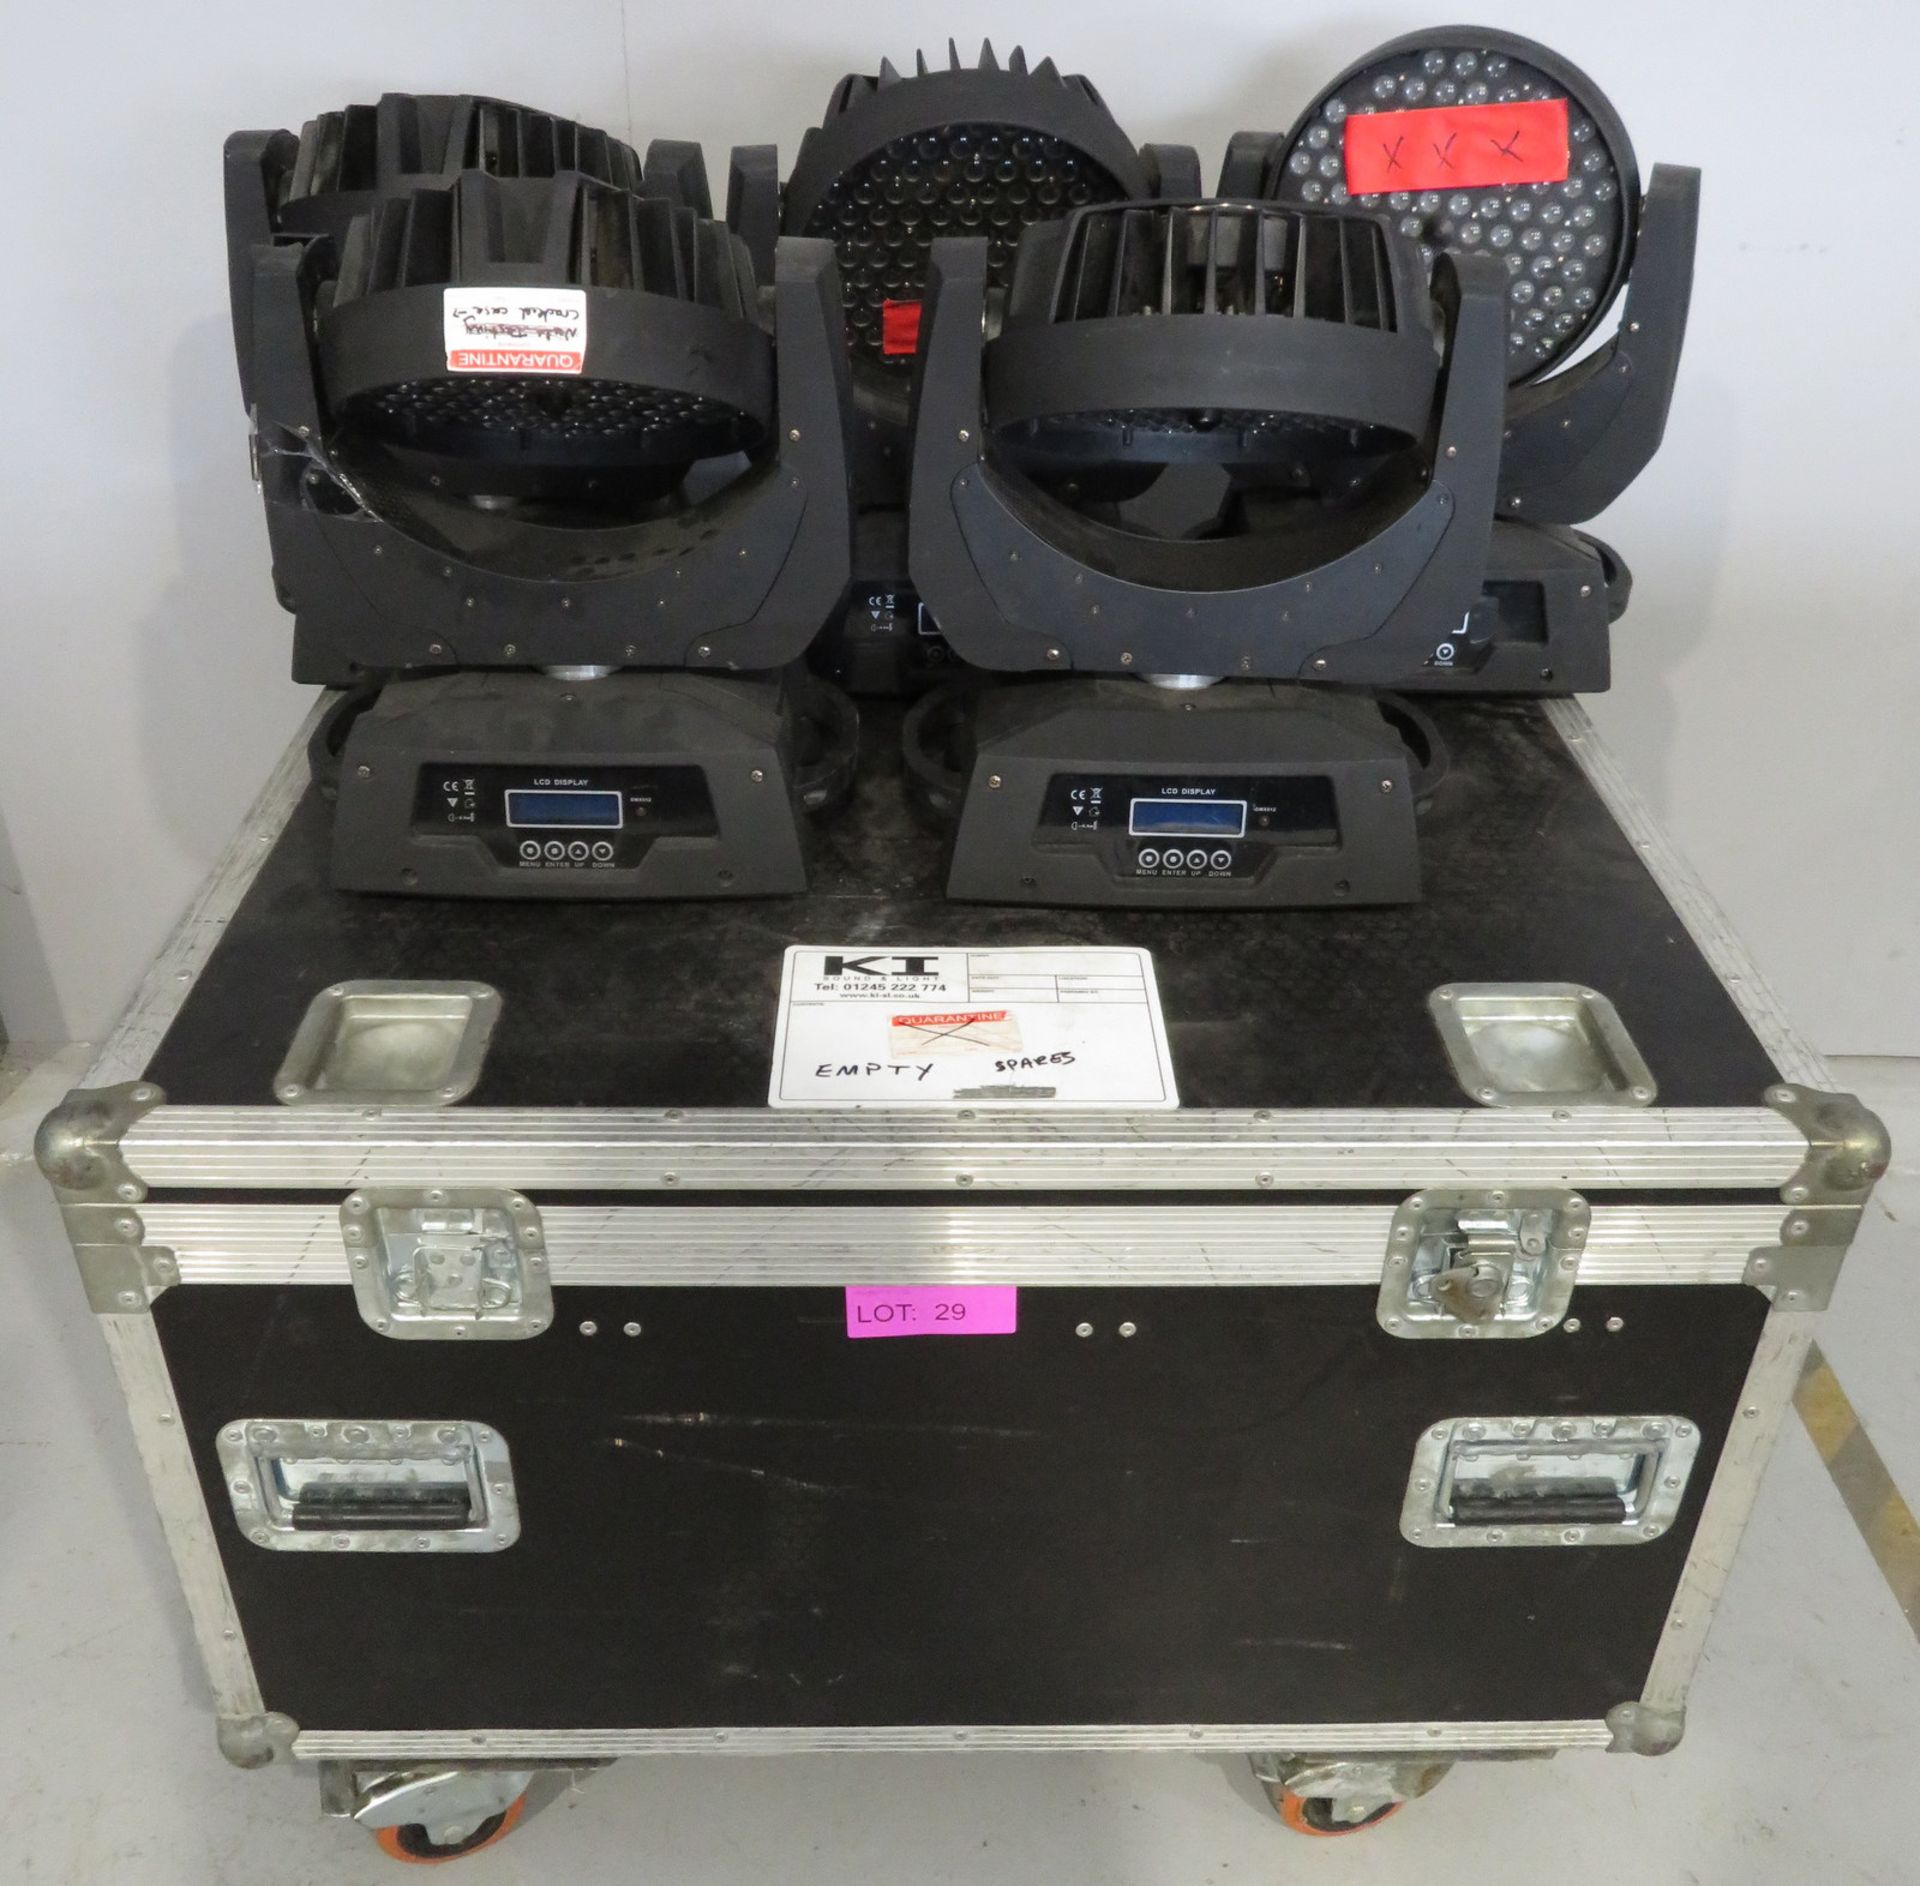 5x LED Moving head wash's in flightcase. No clamps or power cables included. As spares. Ho